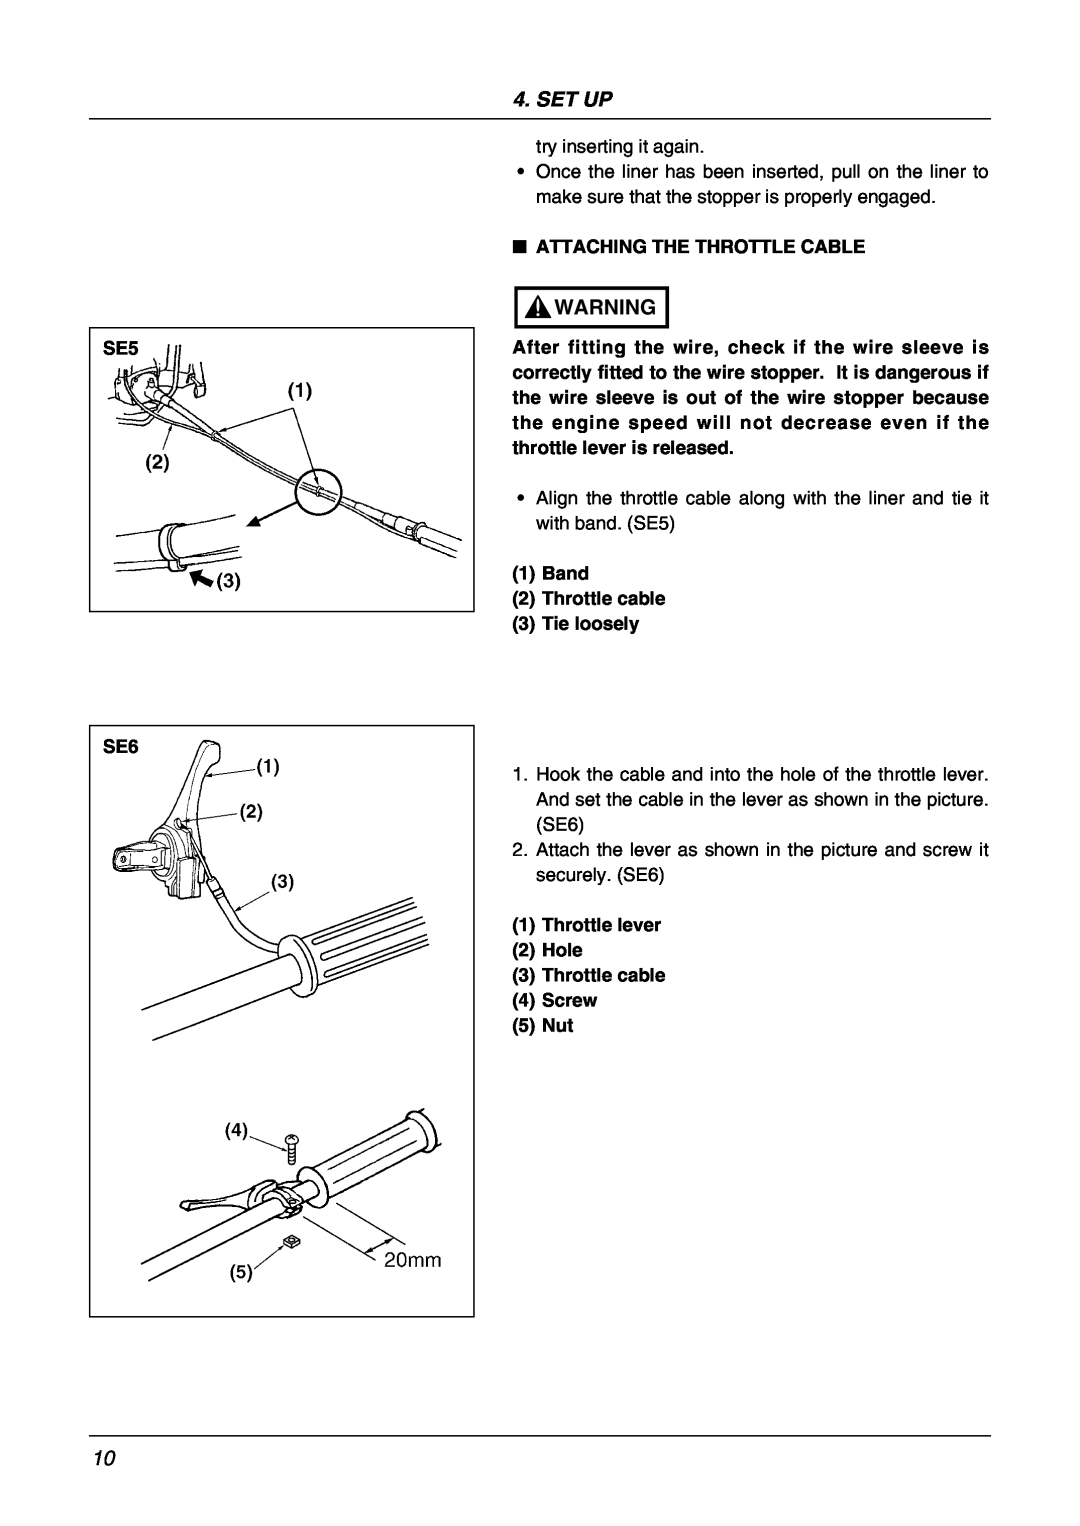 Zenoah BK3410FL, BK4310FL owner manual SE5 SE6, Attaching The Throttle Cable, Band 2 Throttle cable 3 Tie loosely, Set Up 